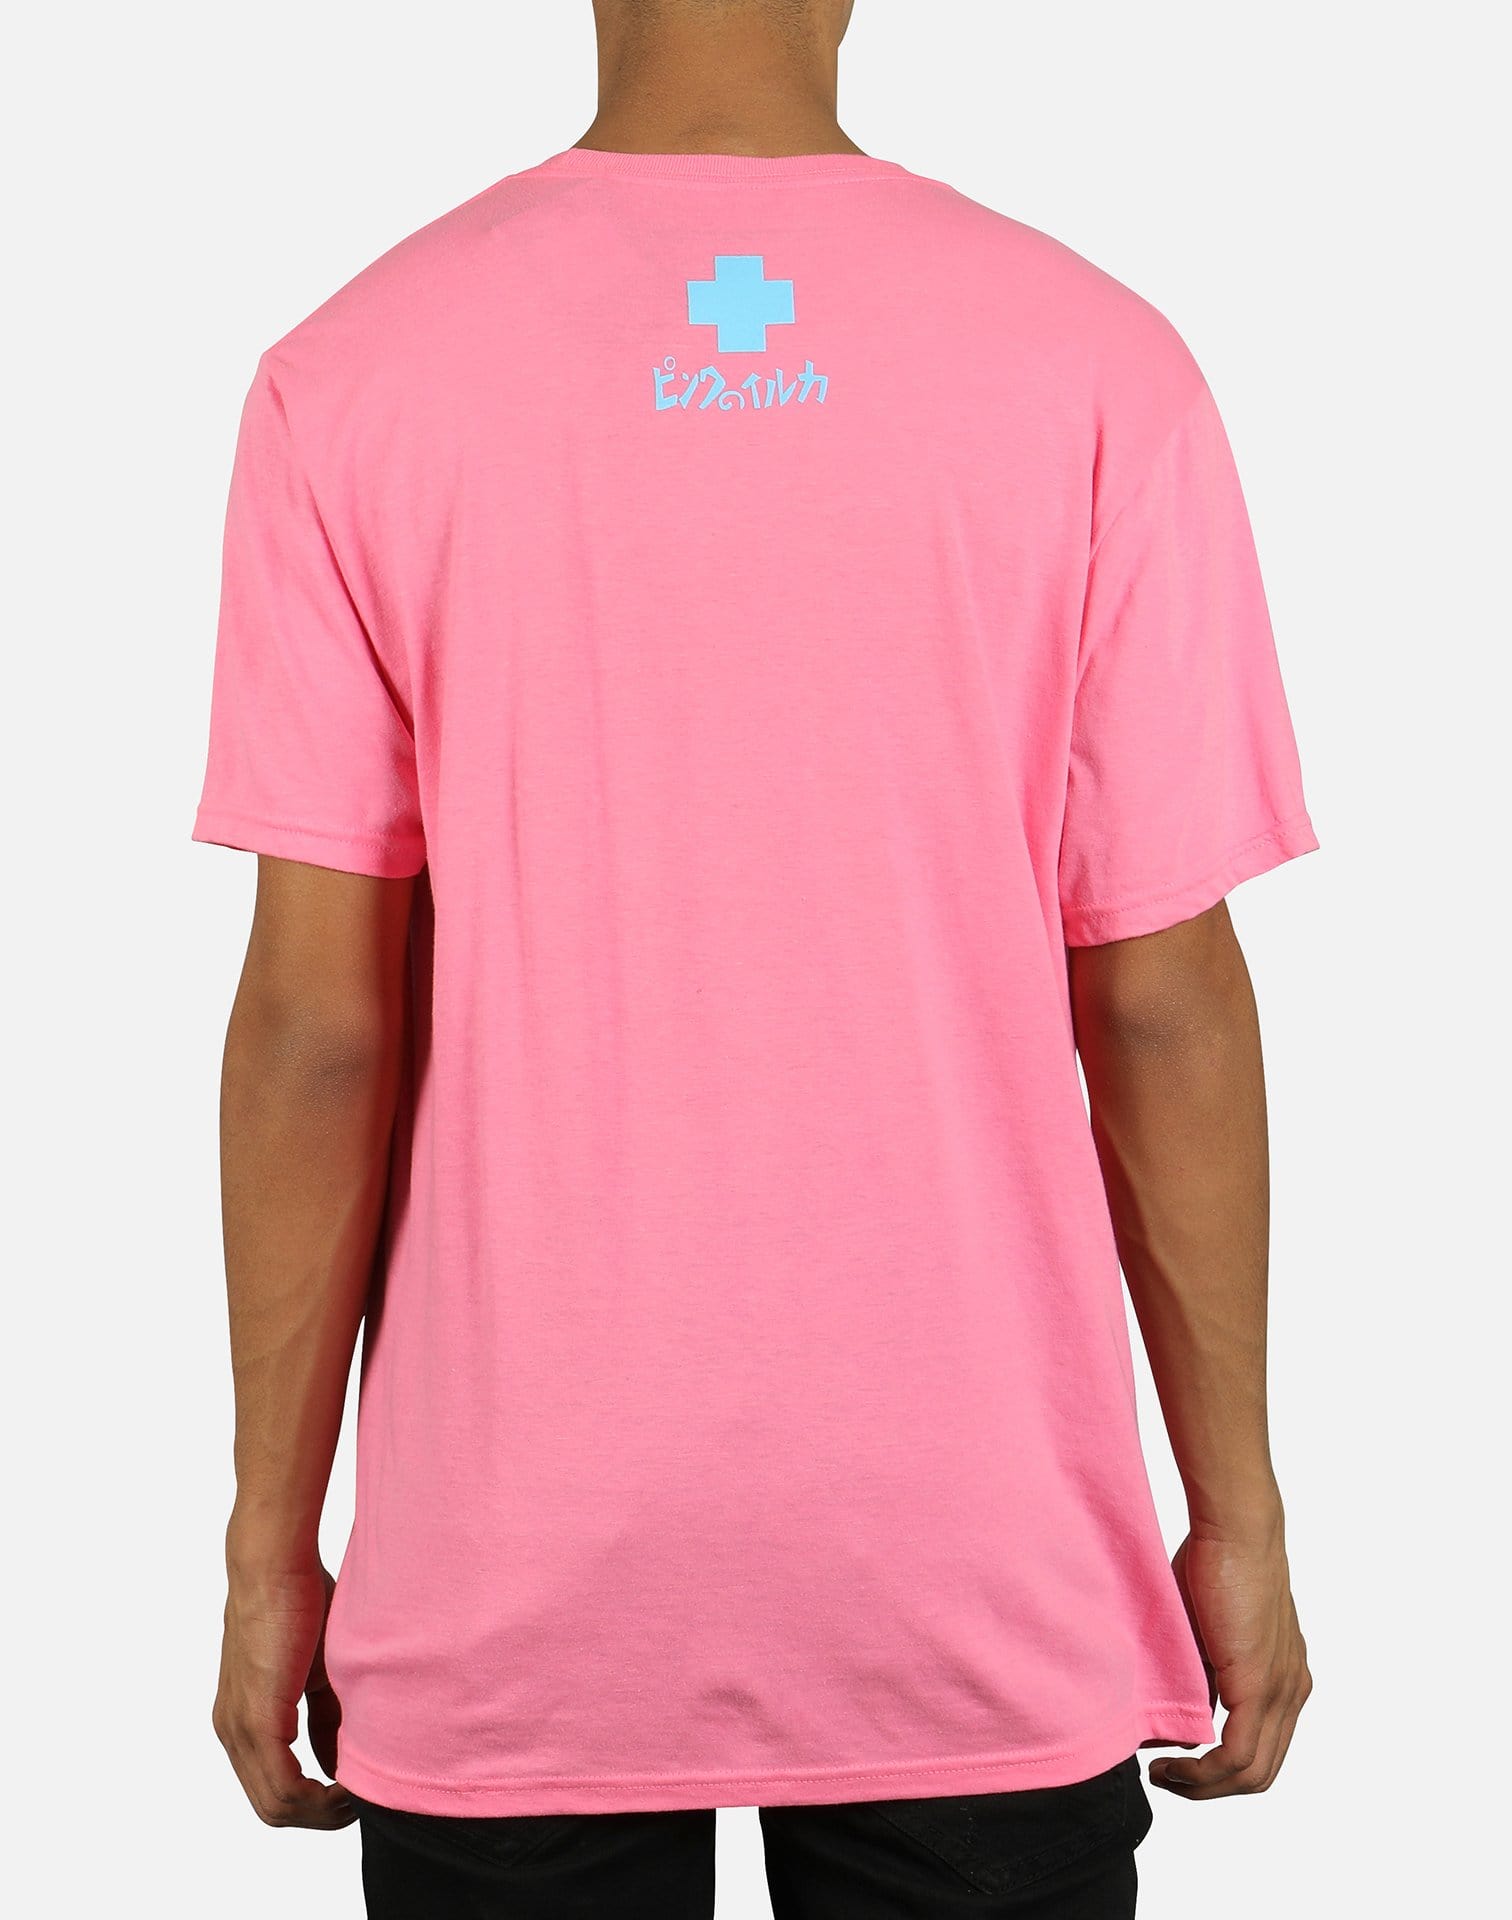 Pink Dolphin Men's Ride The Tire Tee